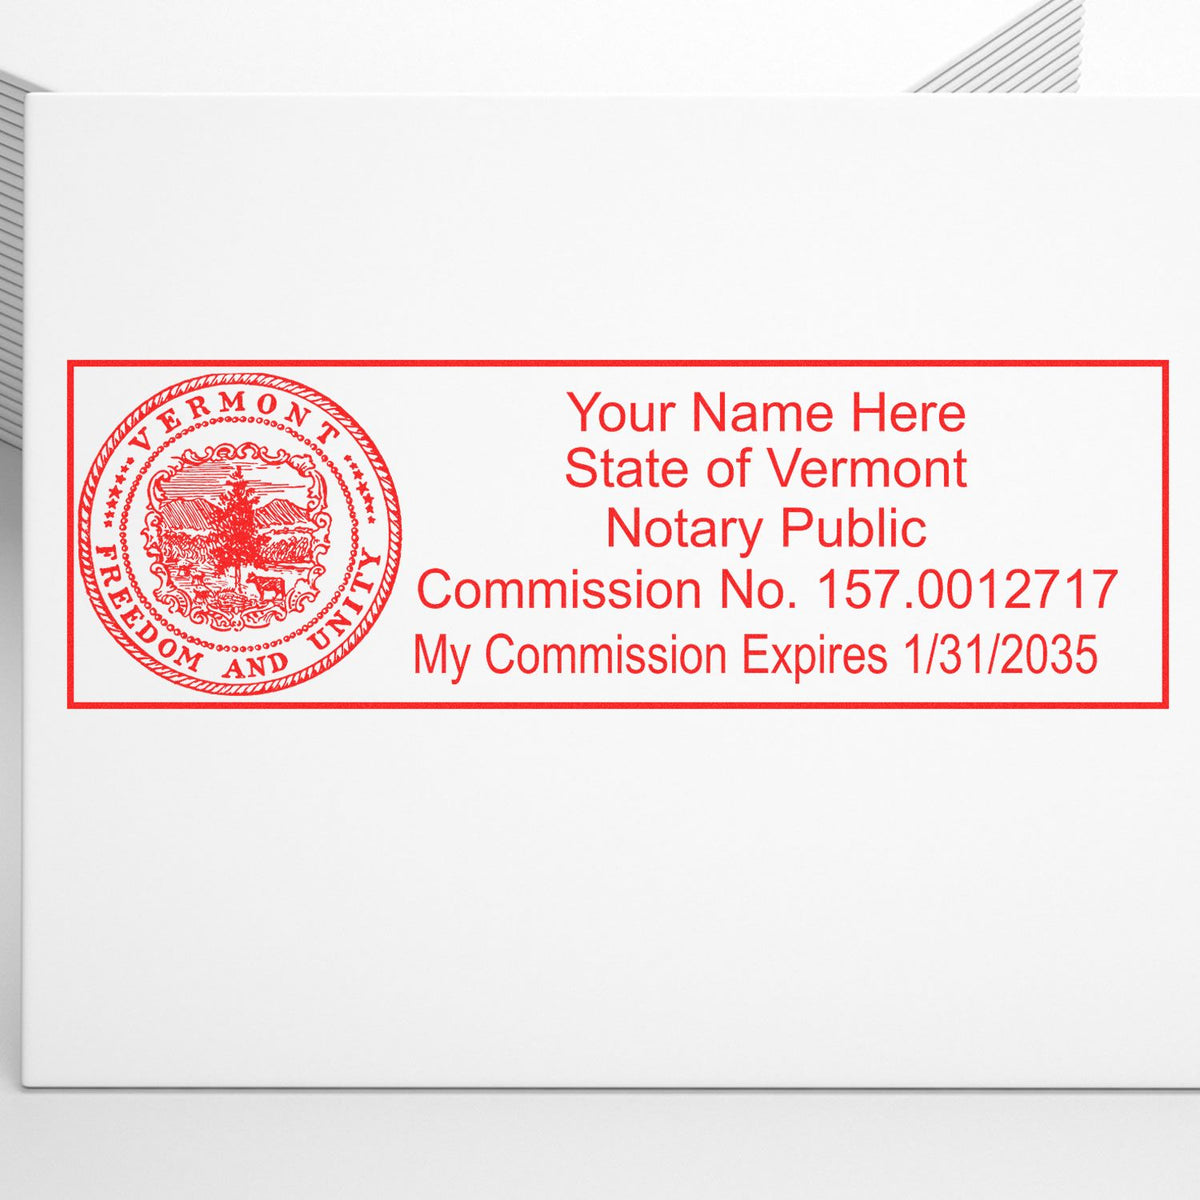 The Self-Inking State Seal Vermont Notary Stamp stamp impression comes to life with a crisp, detailed photo on paper - showcasing true professional quality.